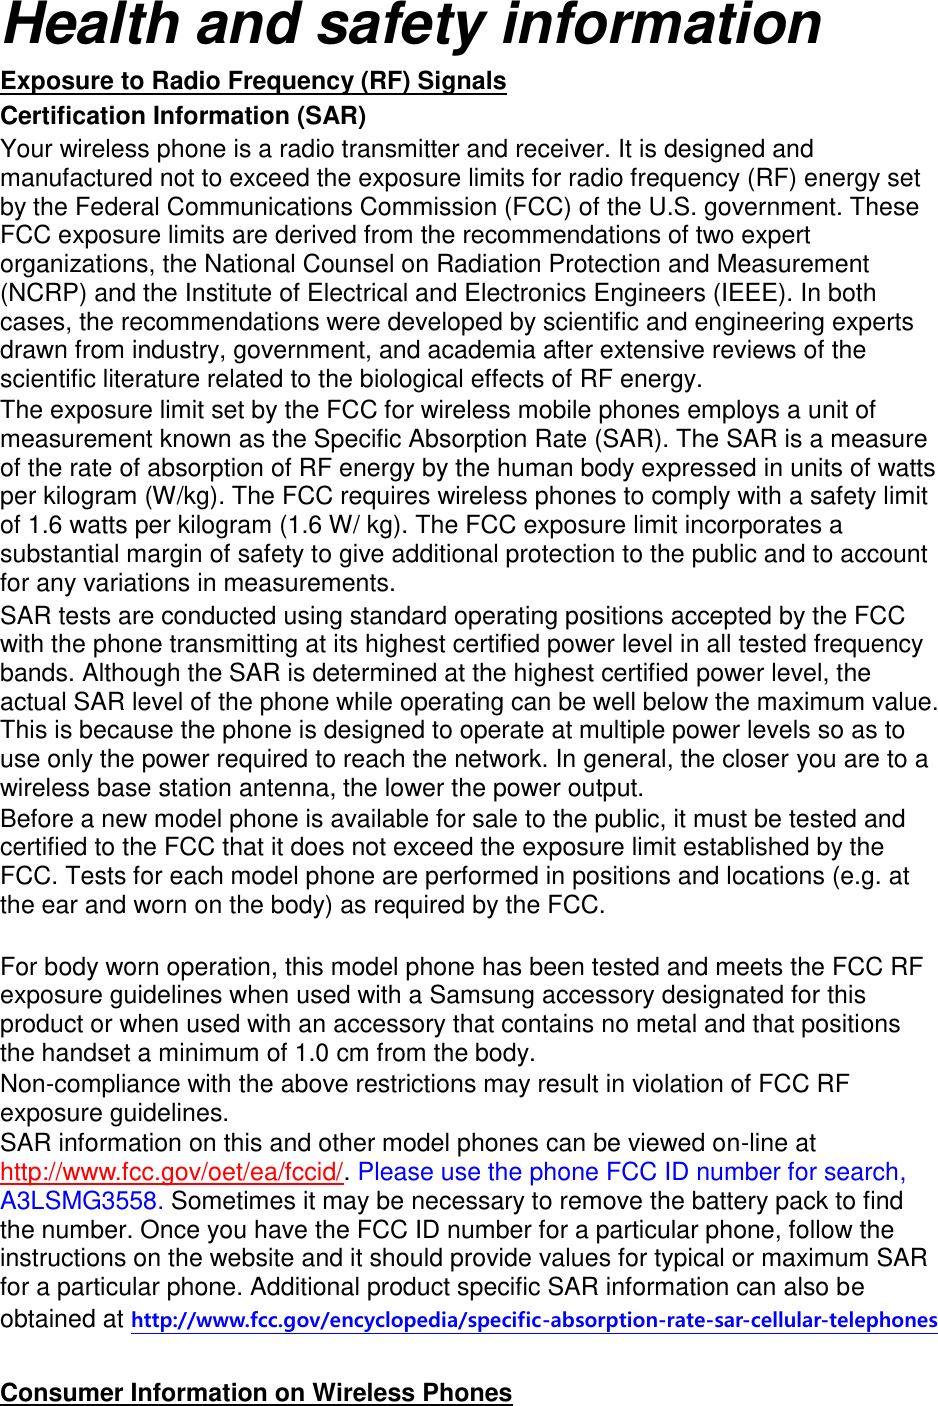 Health and safety information Exposure to Radio Frequency (RF) Signals Certification Information (SAR) Your wireless phone is a radio transmitter and receiver. It is designed and manufactured not to exceed the exposure limits for radio frequency (RF) energy set by the Federal Communications Commission (FCC) of the U.S. government. These FCC exposure limits are derived from the recommendations of two expert organizations, the National Counsel on Radiation Protection and Measurement (NCRP) and the Institute of Electrical and Electronics Engineers (IEEE). In both cases, the recommendations were developed by scientific and engineering experts drawn from industry, government, and academia after extensive reviews of the scientific literature related to the biological effects of RF energy. The exposure limit set by the FCC for wireless mobile phones employs a unit of measurement known as the Specific Absorption Rate (SAR). The SAR is a measure of the rate of absorption of RF energy by the human body expressed in units of watts per kilogram (W/kg). The FCC requires wireless phones to comply with a safety limit of 1.6 watts per kilogram (1.6 W/ kg). The FCC exposure limit incorporates a substantial margin of safety to give additional protection to the public and to account for any variations in measurements. SAR tests are conducted using standard operating positions accepted by the FCC with the phone transmitting at its highest certified power level in all tested frequency bands. Although the SAR is determined at the highest certified power level, the actual SAR level of the phone while operating can be well below the maximum value. This is because the phone is designed to operate at multiple power levels so as to use only the power required to reach the network. In general, the closer you are to a wireless base station antenna, the lower the power output. Before a new model phone is available for sale to the public, it must be tested and certified to the FCC that it does not exceed the exposure limit established by the FCC. Tests for each model phone are performed in positions and locations (e.g. at the ear and worn on the body) as required by the FCC.      For body worn operation, this model phone has been tested and meets the FCC RF exposure guidelines when used with a Samsung accessory designated for this product or when used with an accessory that contains no metal and that positions the handset a minimum of 1.0 cm from the body.   Non-compliance with the above restrictions may result in violation of FCC RF exposure guidelines. SAR information on this and other model phones can be viewed on-line at http://www.fcc.gov/oet/ea/fccid/. Please use the phone FCC ID number for search, A3LSMG3558. Sometimes it may be necessary to remove the battery pack to find the number. Once you have the FCC ID number for a particular phone, follow the instructions on the website and it should provide values for typical or maximum SAR for a particular phone. Additional product specific SAR information can also be obtained at http://www.fcc.gov/encyclopedia/specific-absorption-rate-sar-cellular-telephones  Consumer Information on Wireless Phones 